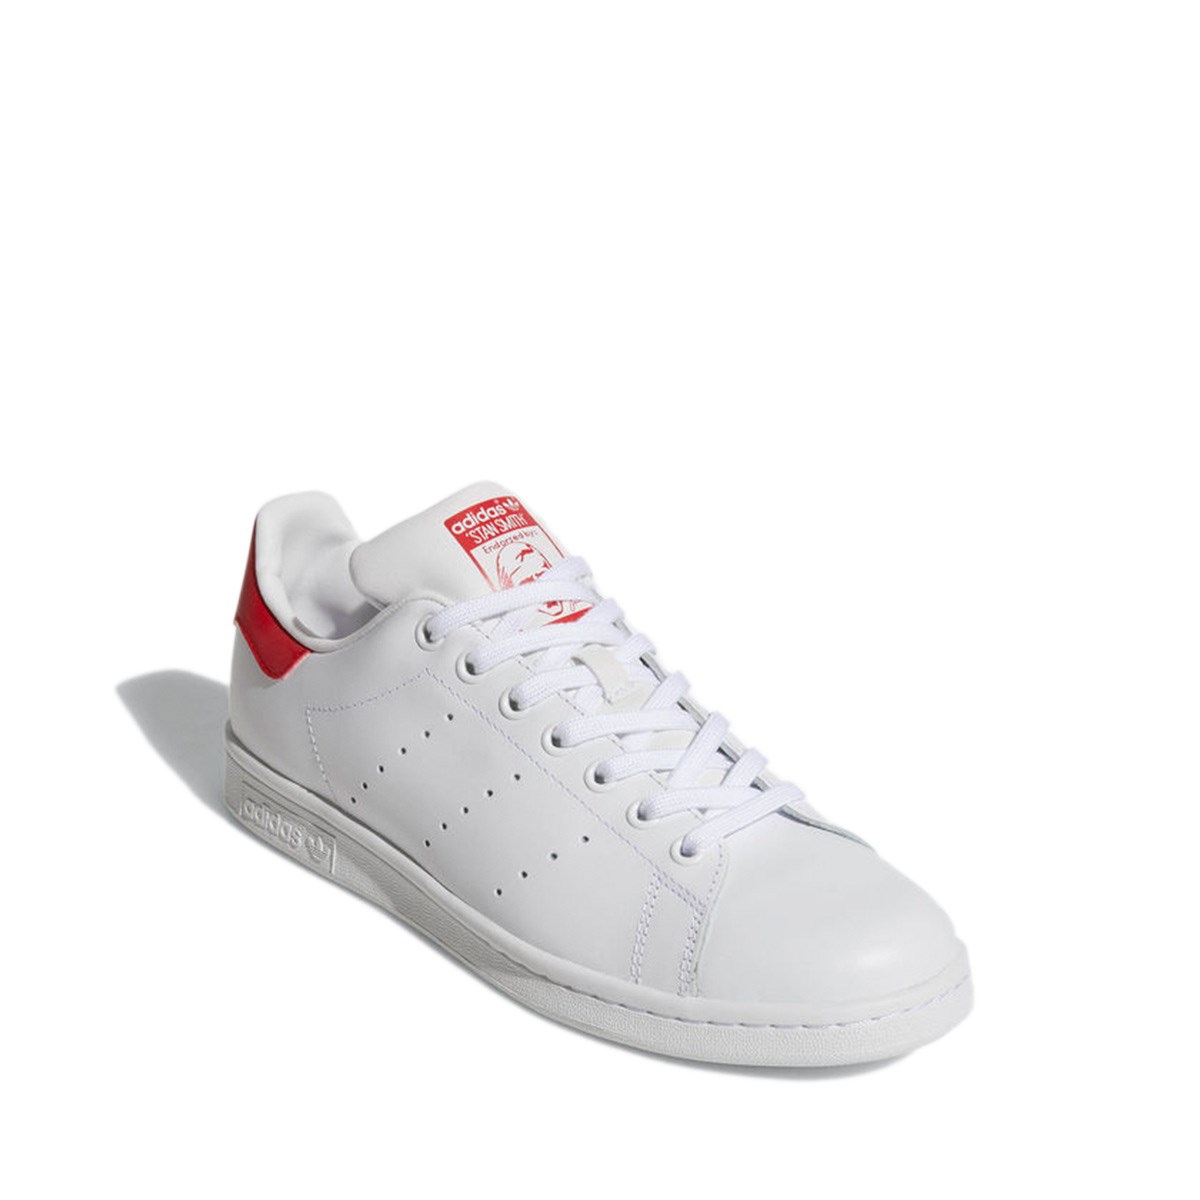 Men's Stan Smith Sneakers in Red 